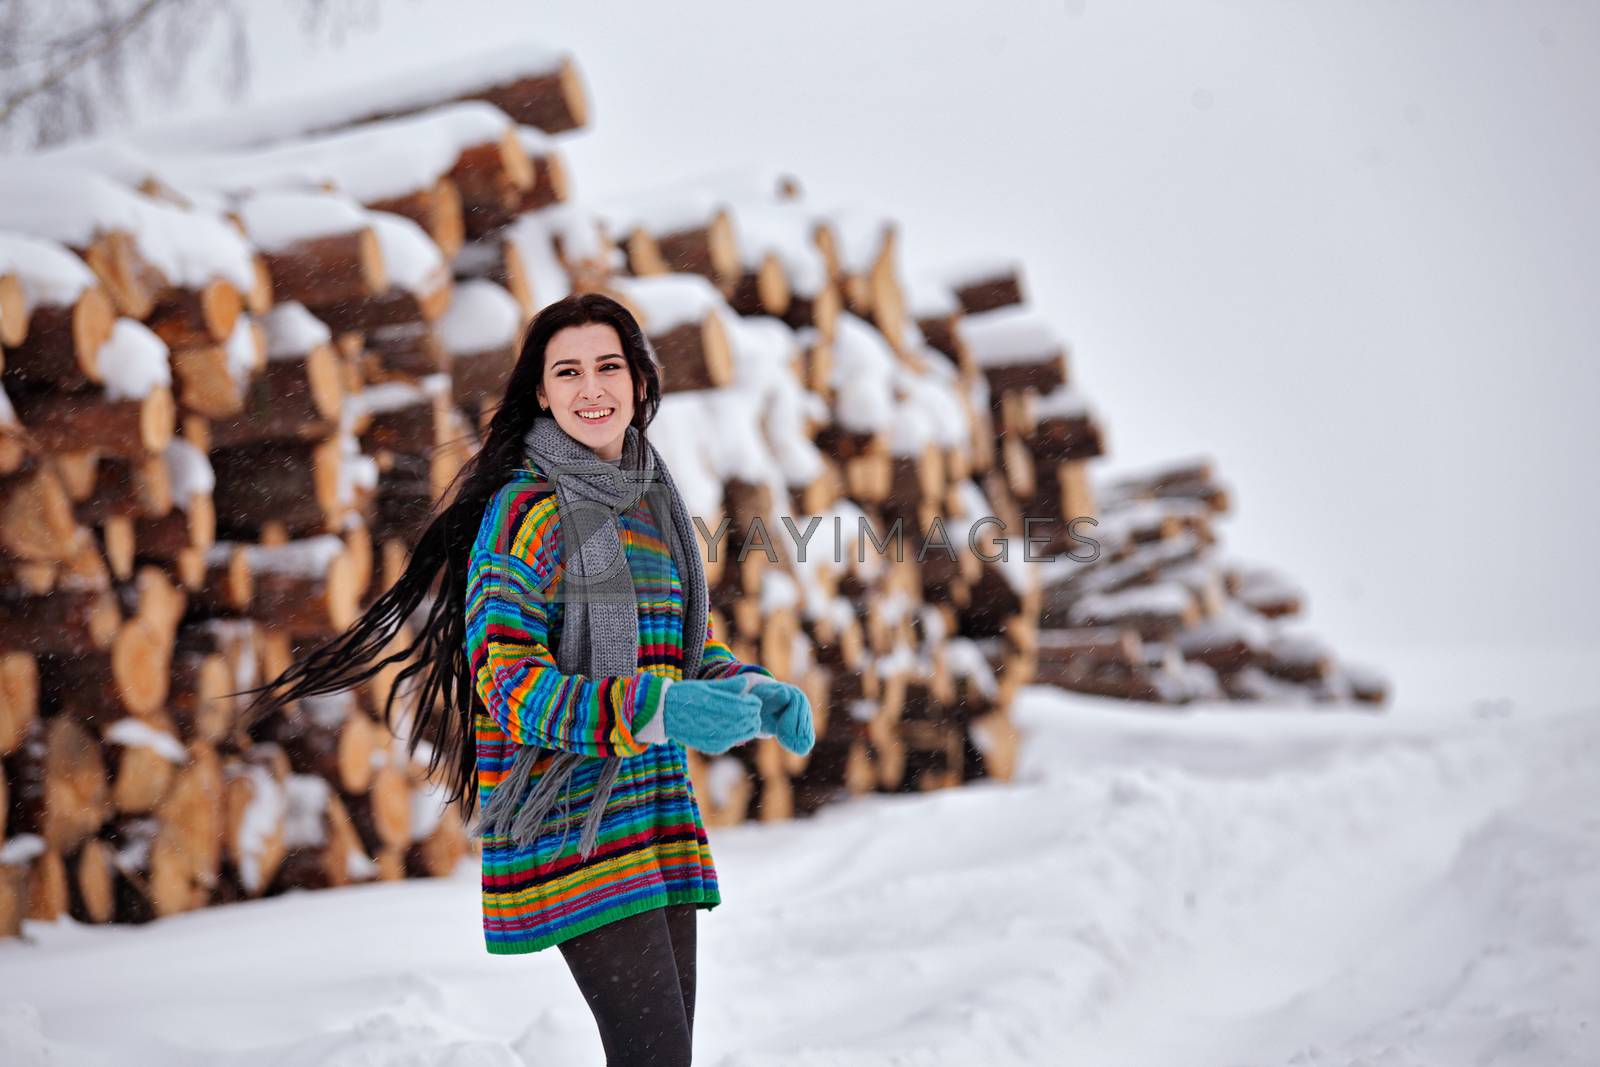 Royalty free image of Beautiful young woman walking in winter outdoors by weise_maxim